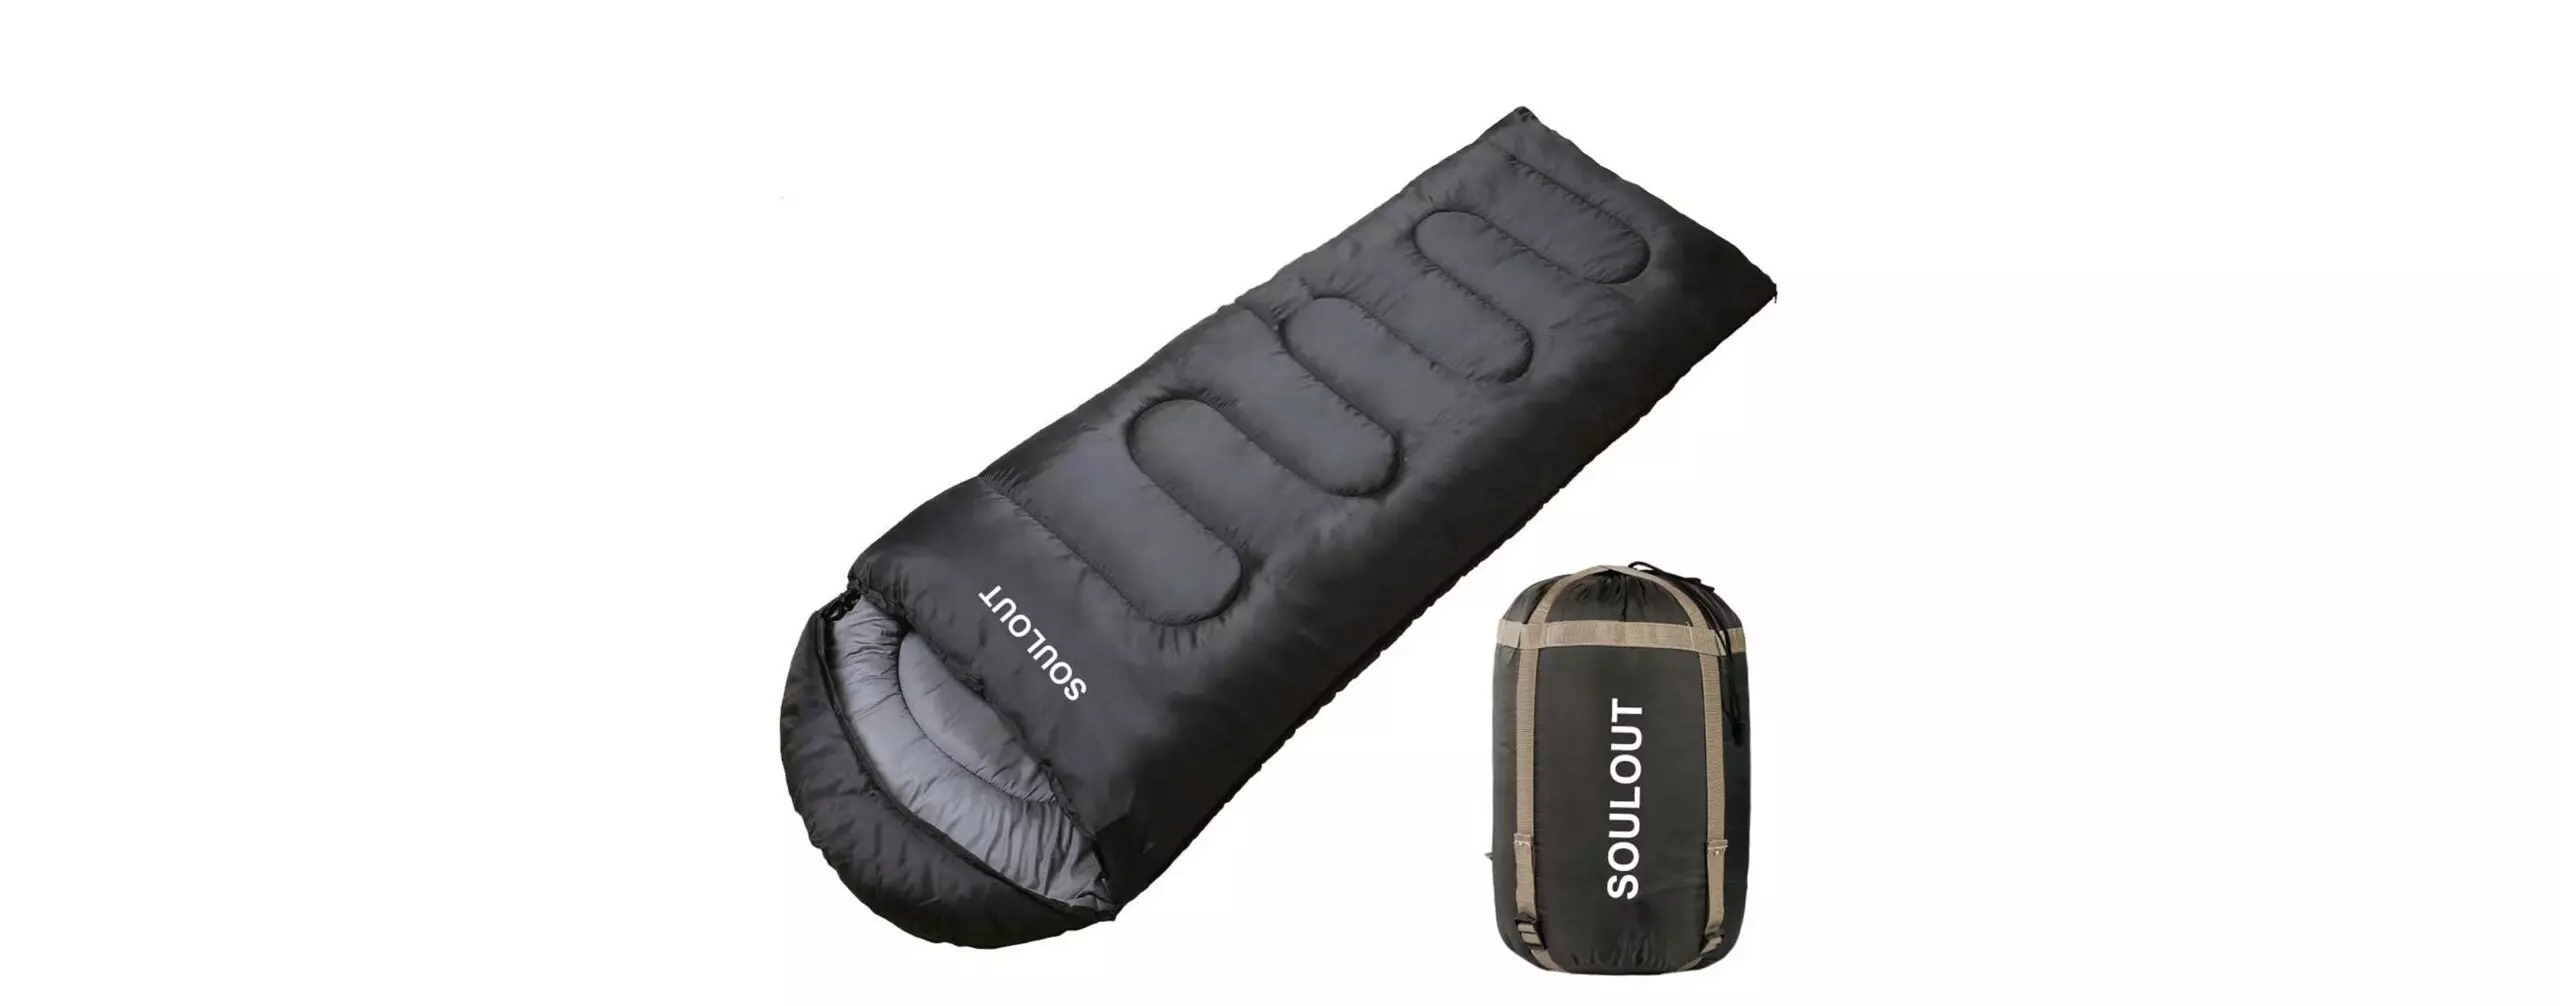 The Best Lightweight Sleeping Bags (Review and Buying Guide) of 2021